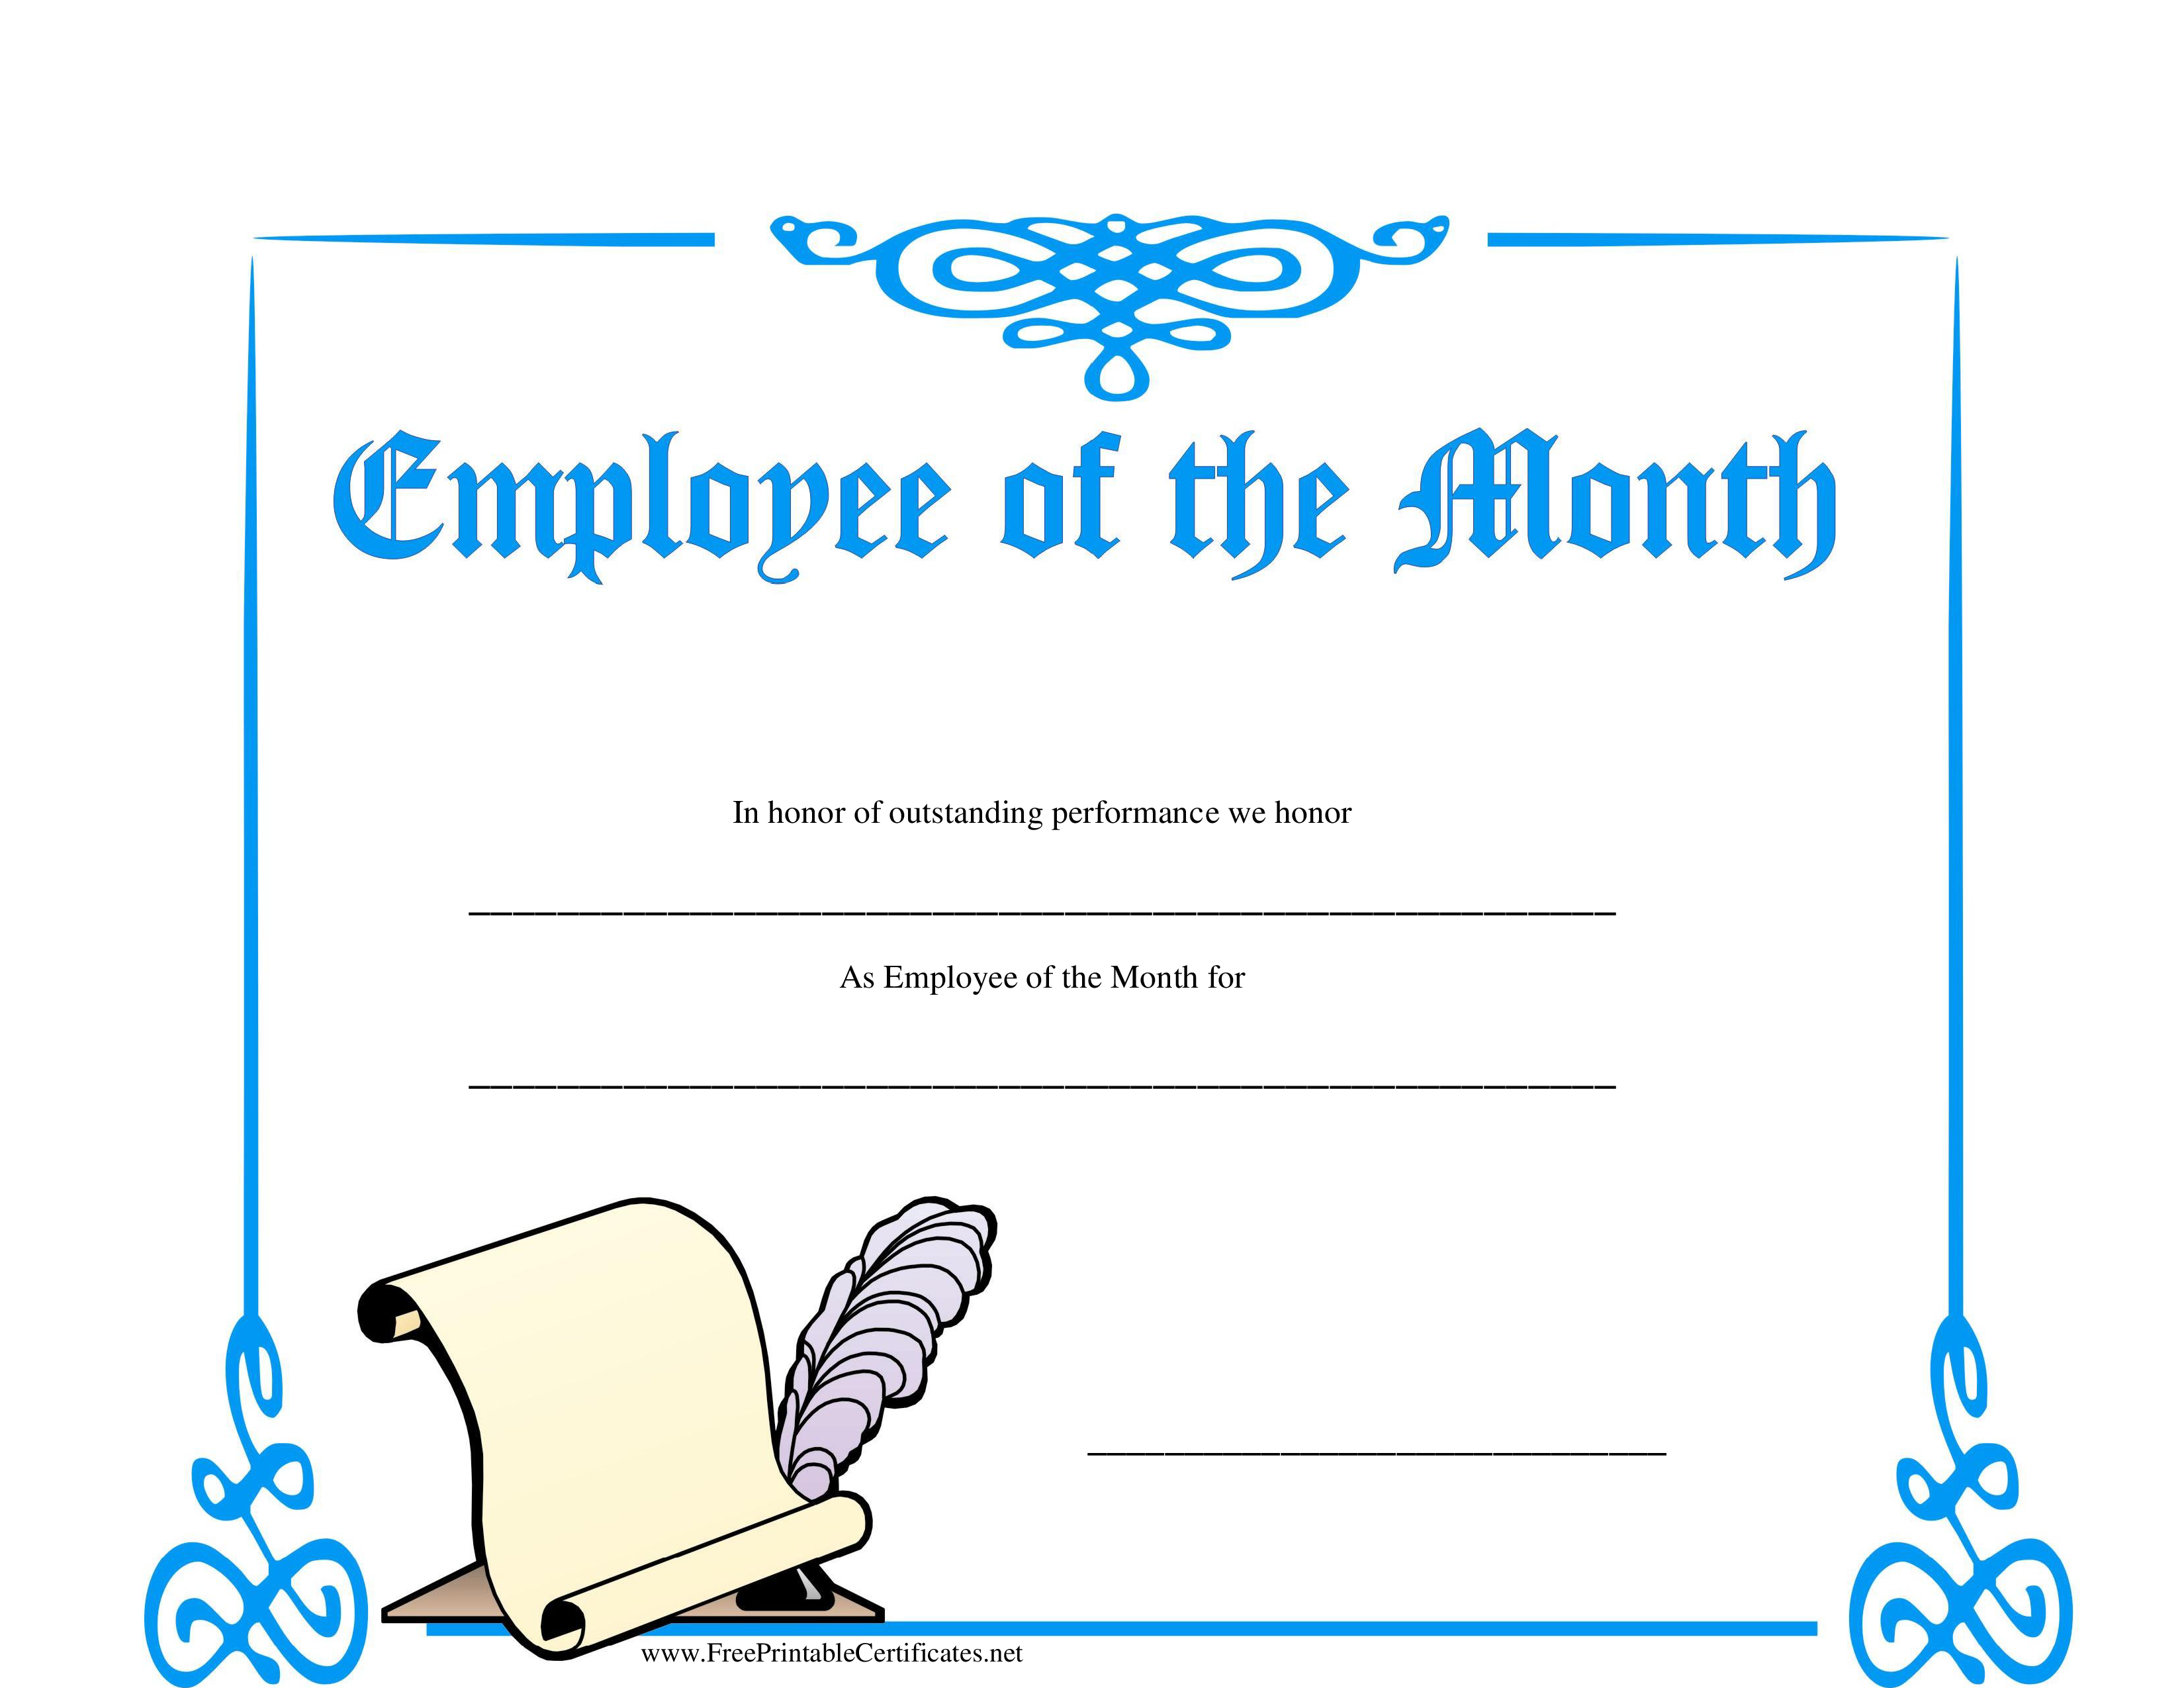 Employee Of The Month Certificate Templates at